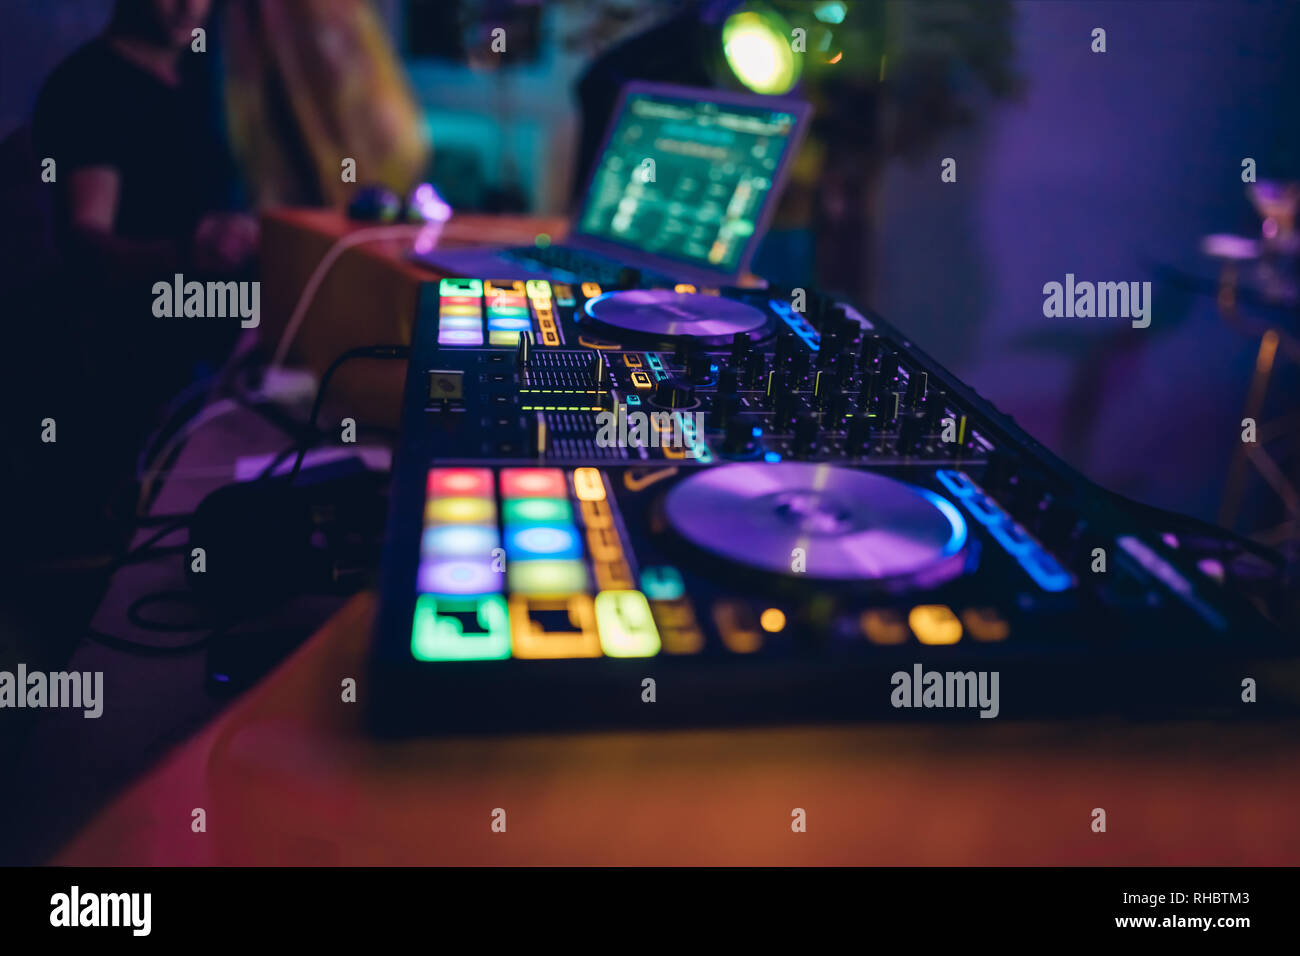 DJ plays live set and mixing music on turntable console at stage in the night club. Disc Jokey Hands on a sound mixer station at club party. DJ mixer Stock Photo